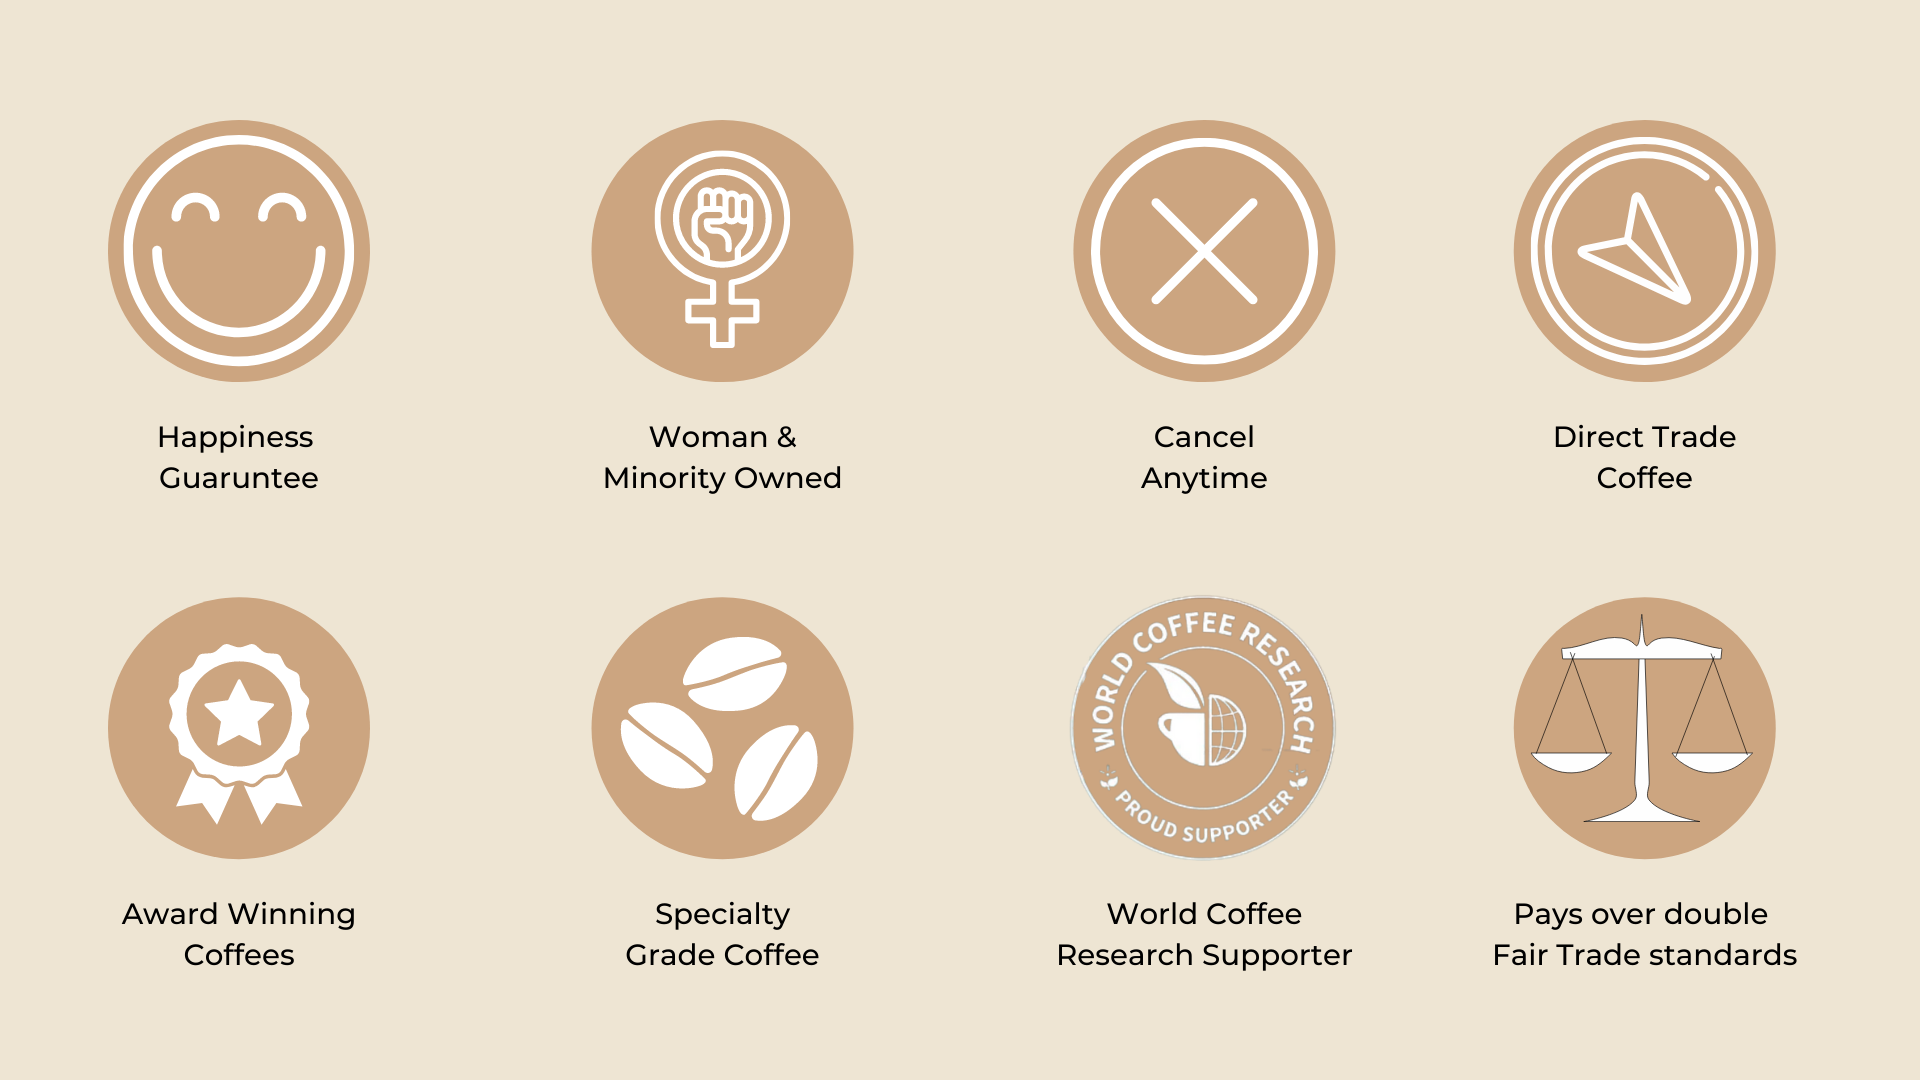 guaruntee woman minority owned direct trade coffee award winning specialty grade world coffee research supporter fair trade 